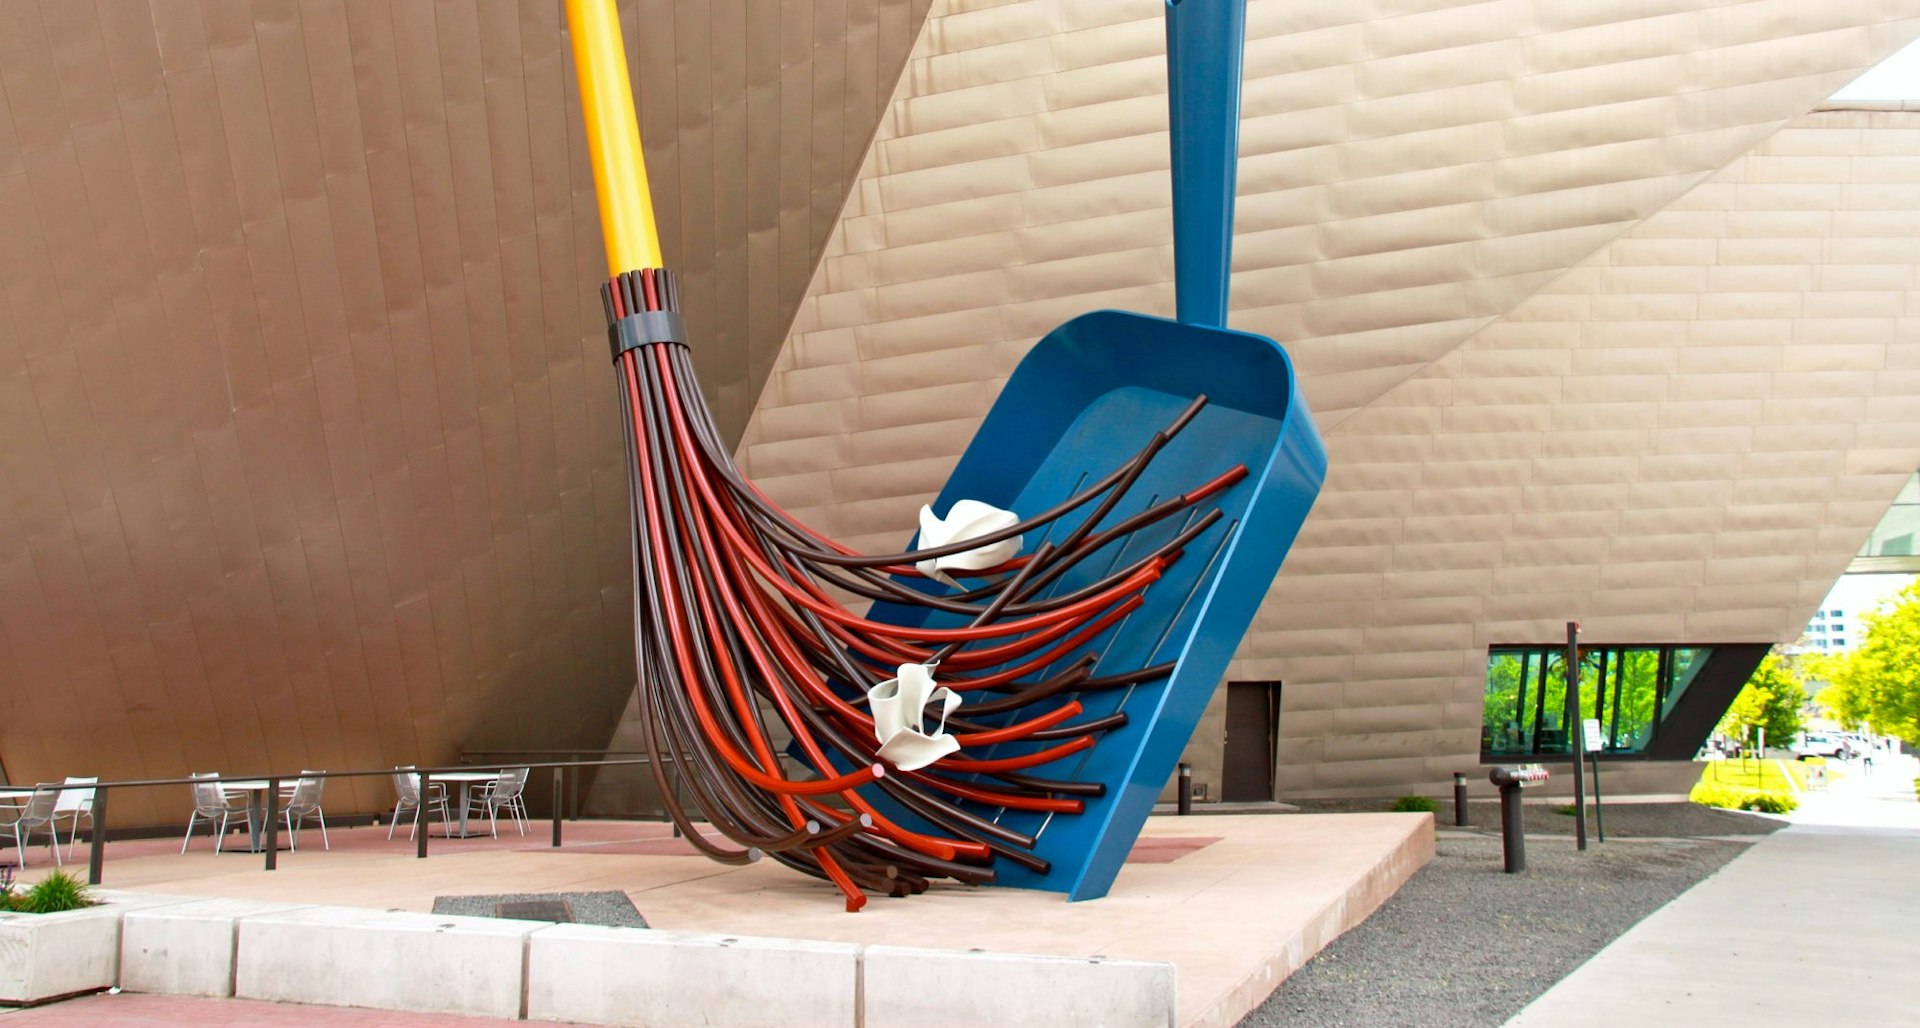 The Big Sweep sculpture at the Civic Center Cultural Complex in Denver